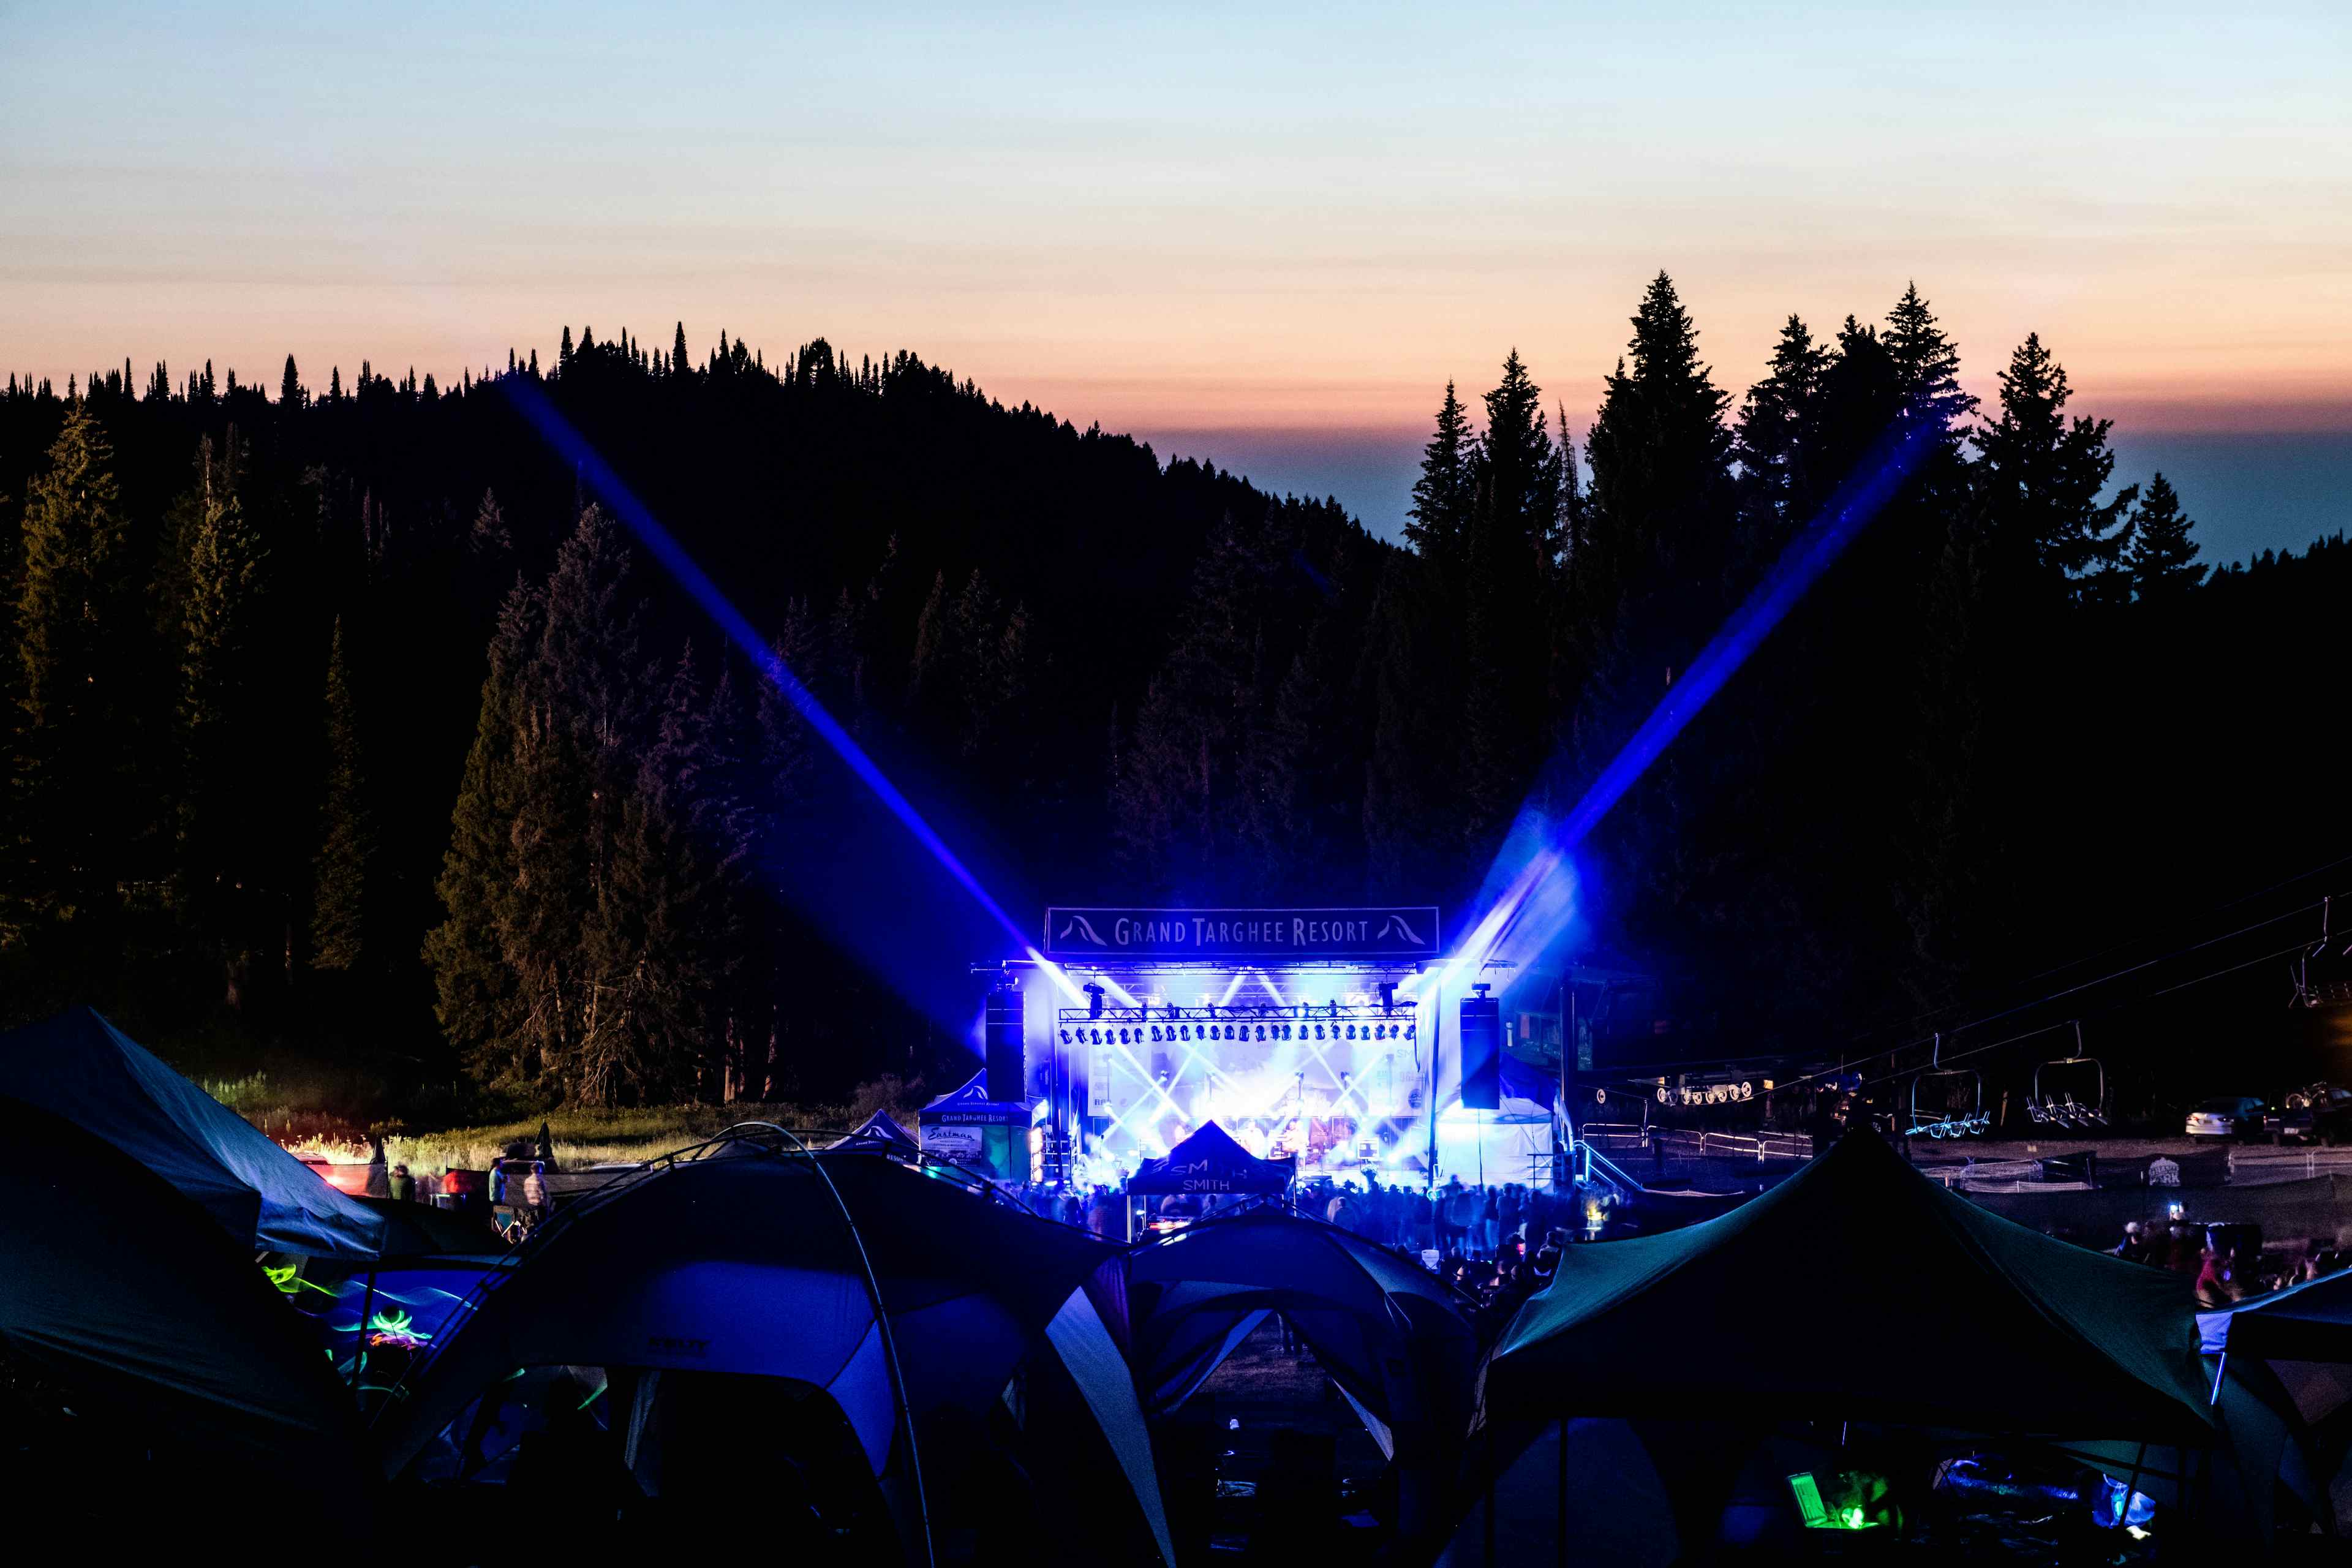 The Targhee Bluegrass Festival, an annual event in Teton Valley in Eastern Idaho, a part of the Yellowstone Teton Territory.